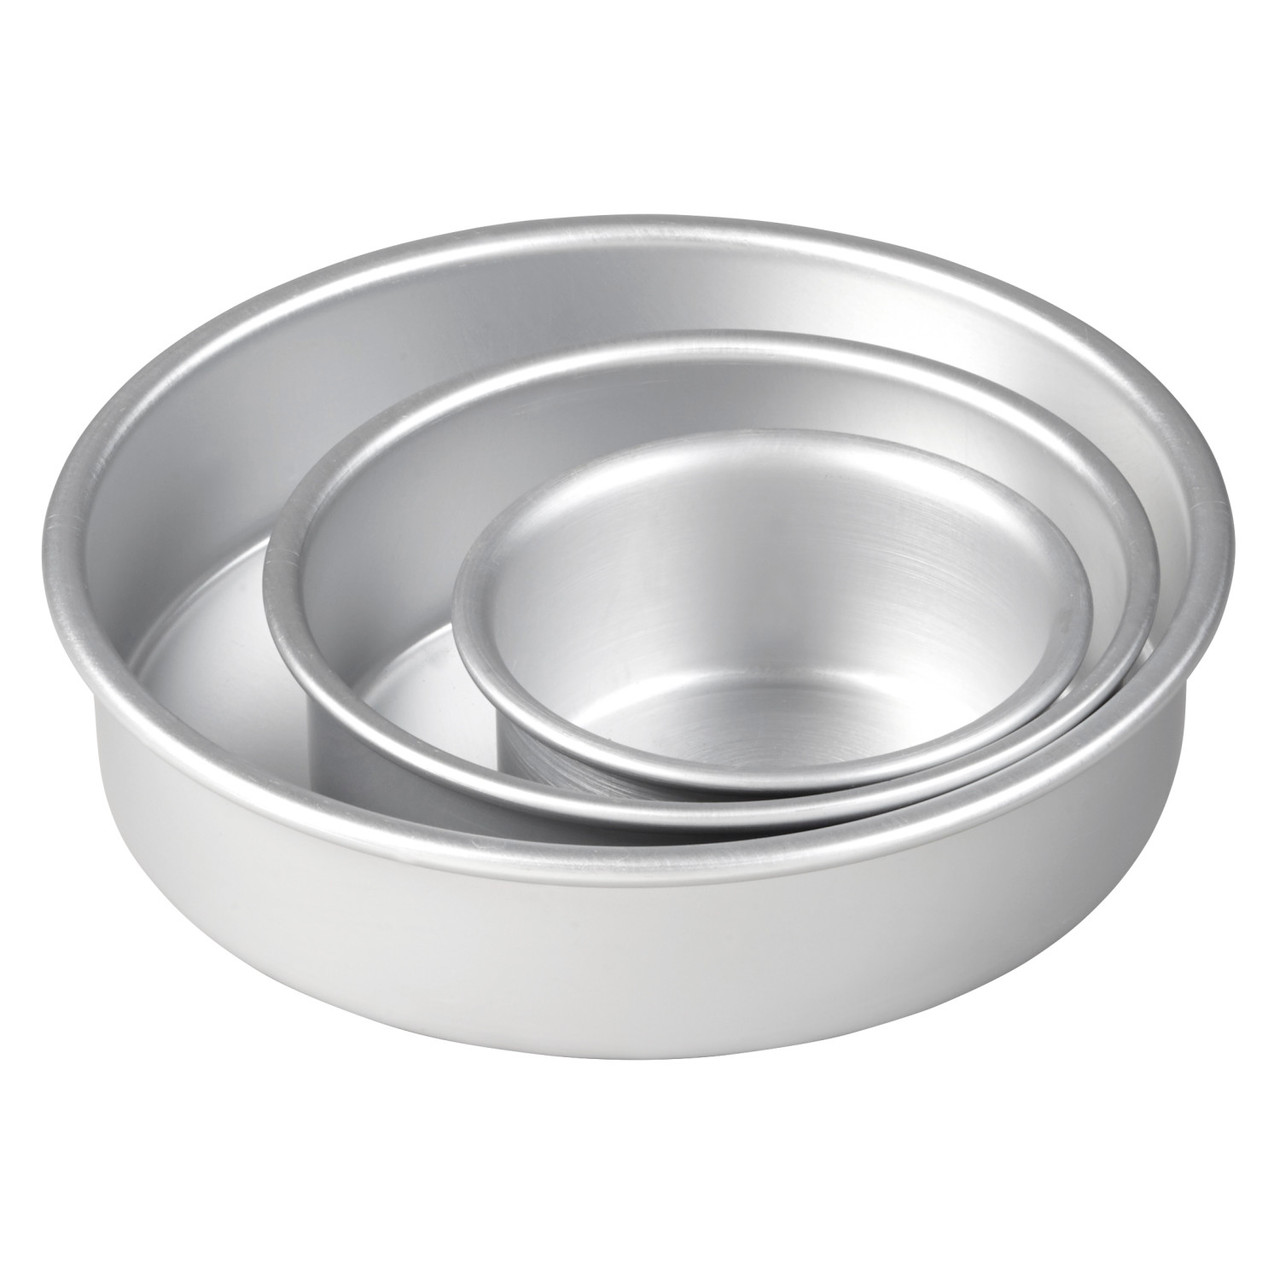 Stainless Steel Round Cake And Pastry Mold Set Mini And Large Cup Cake Mould  Steel For Food And Dessert Molding 2.4In Size From Dagongre, $20.45 |  DHgate.Com